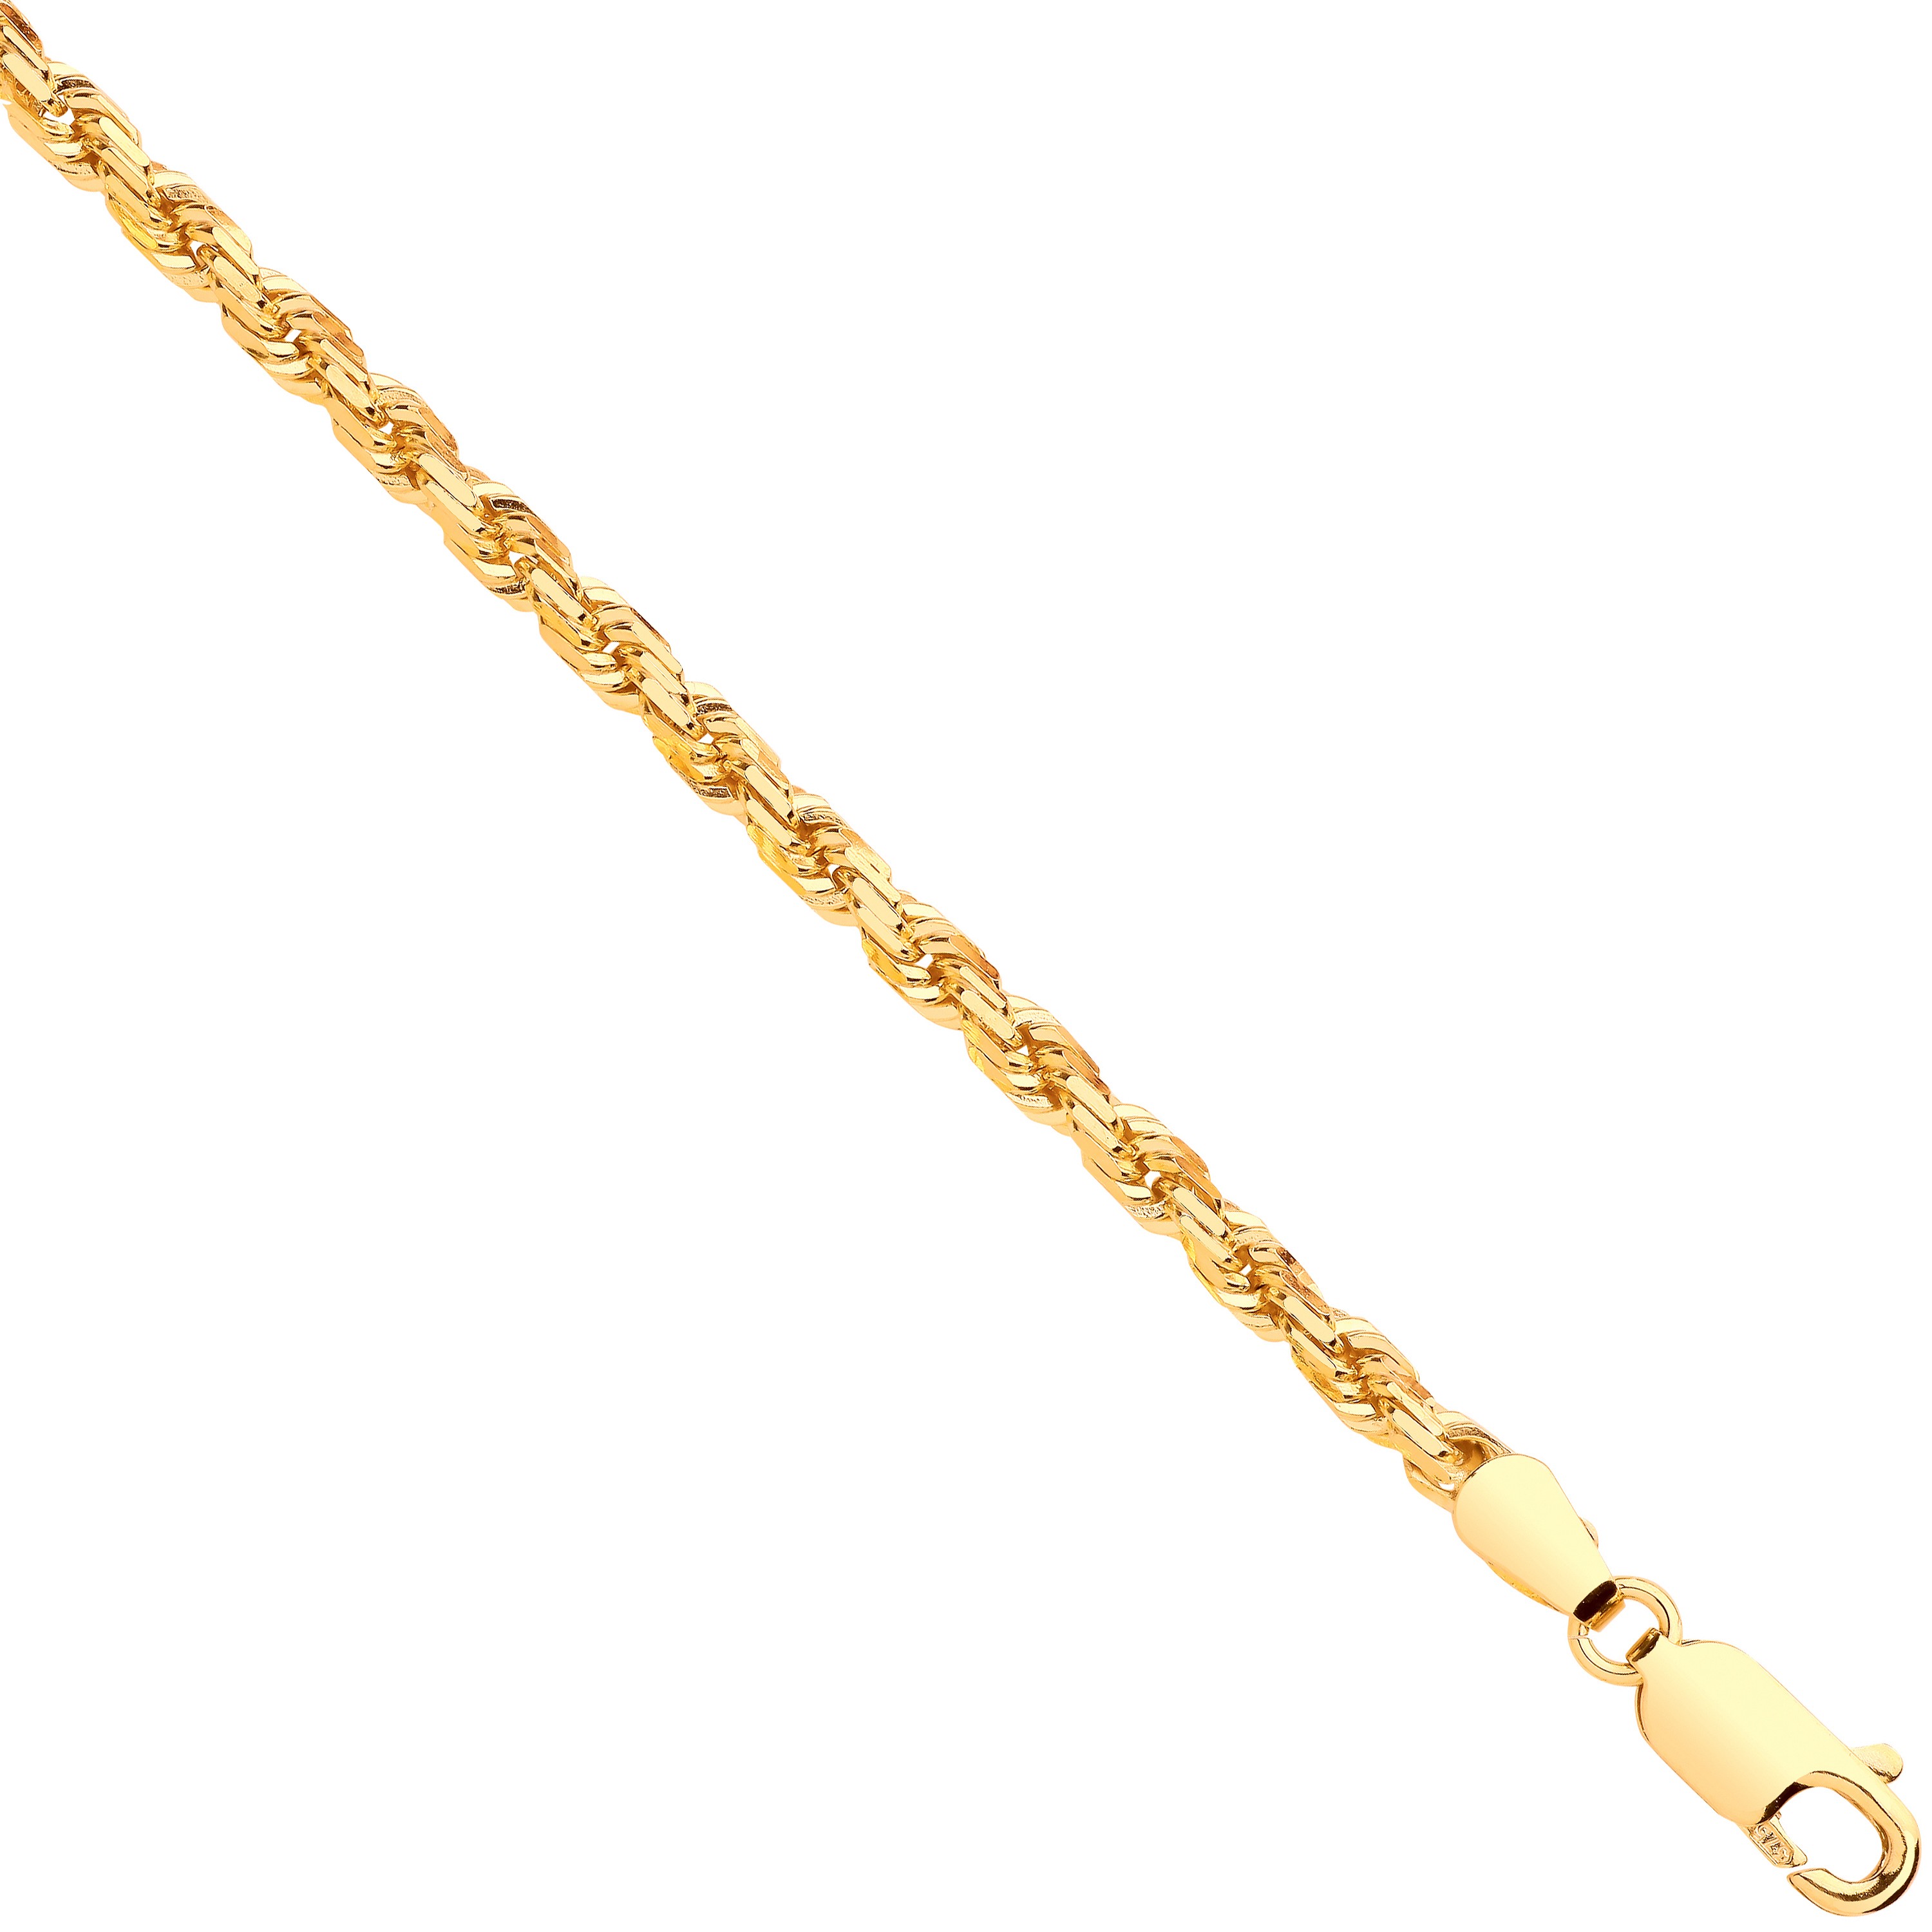 Y/G D/C 3.0mm Solid Rope Chain